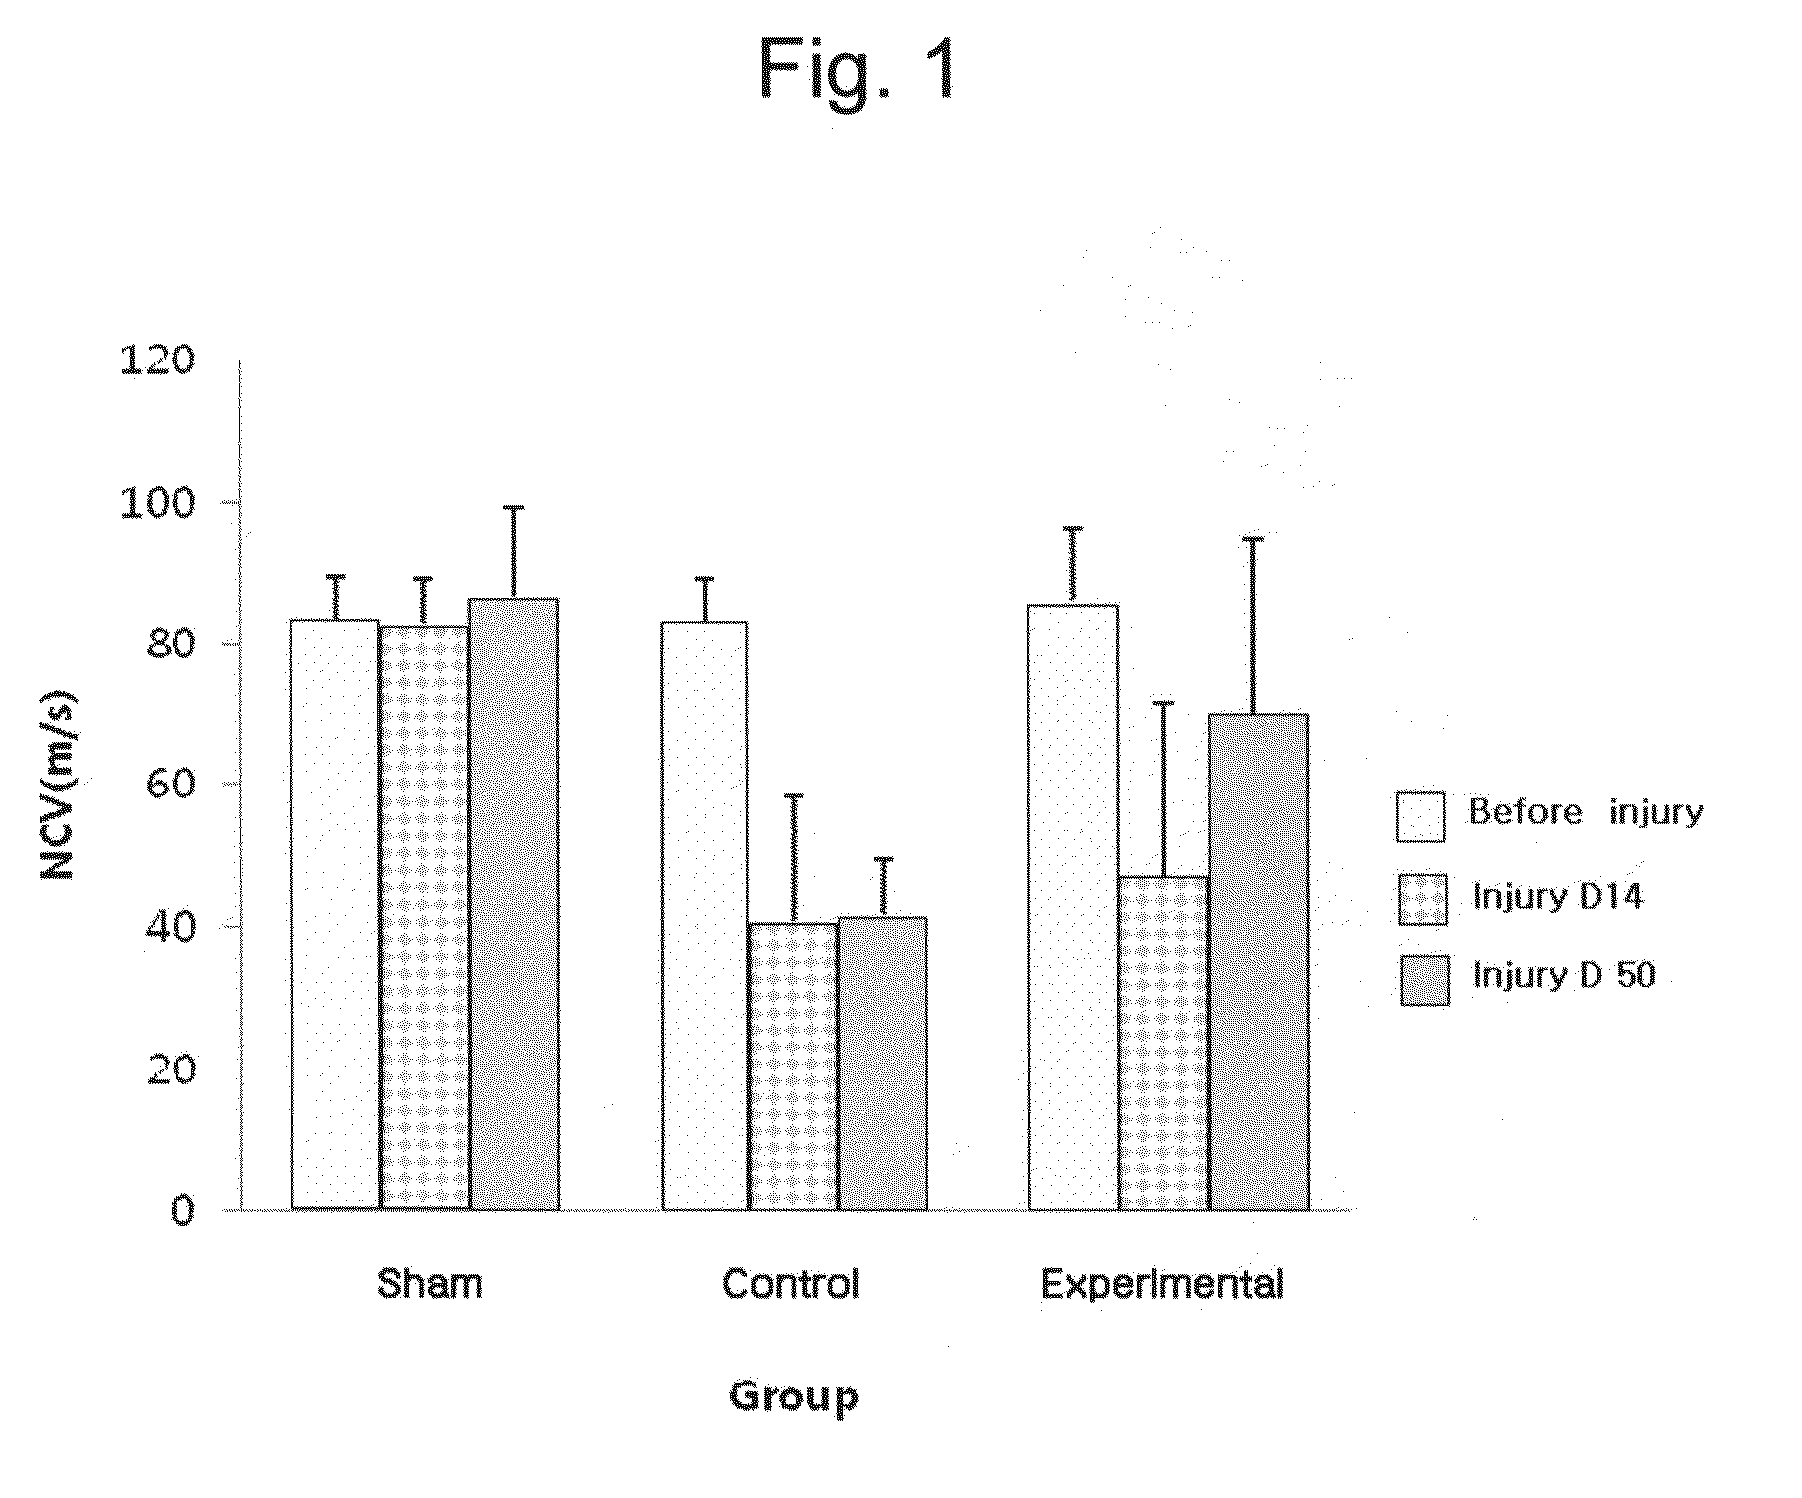 Agent comprising g-csf for treatment of traumatic peripheral nerve injury and method for treating traumatic peripheral nerve injury with the same